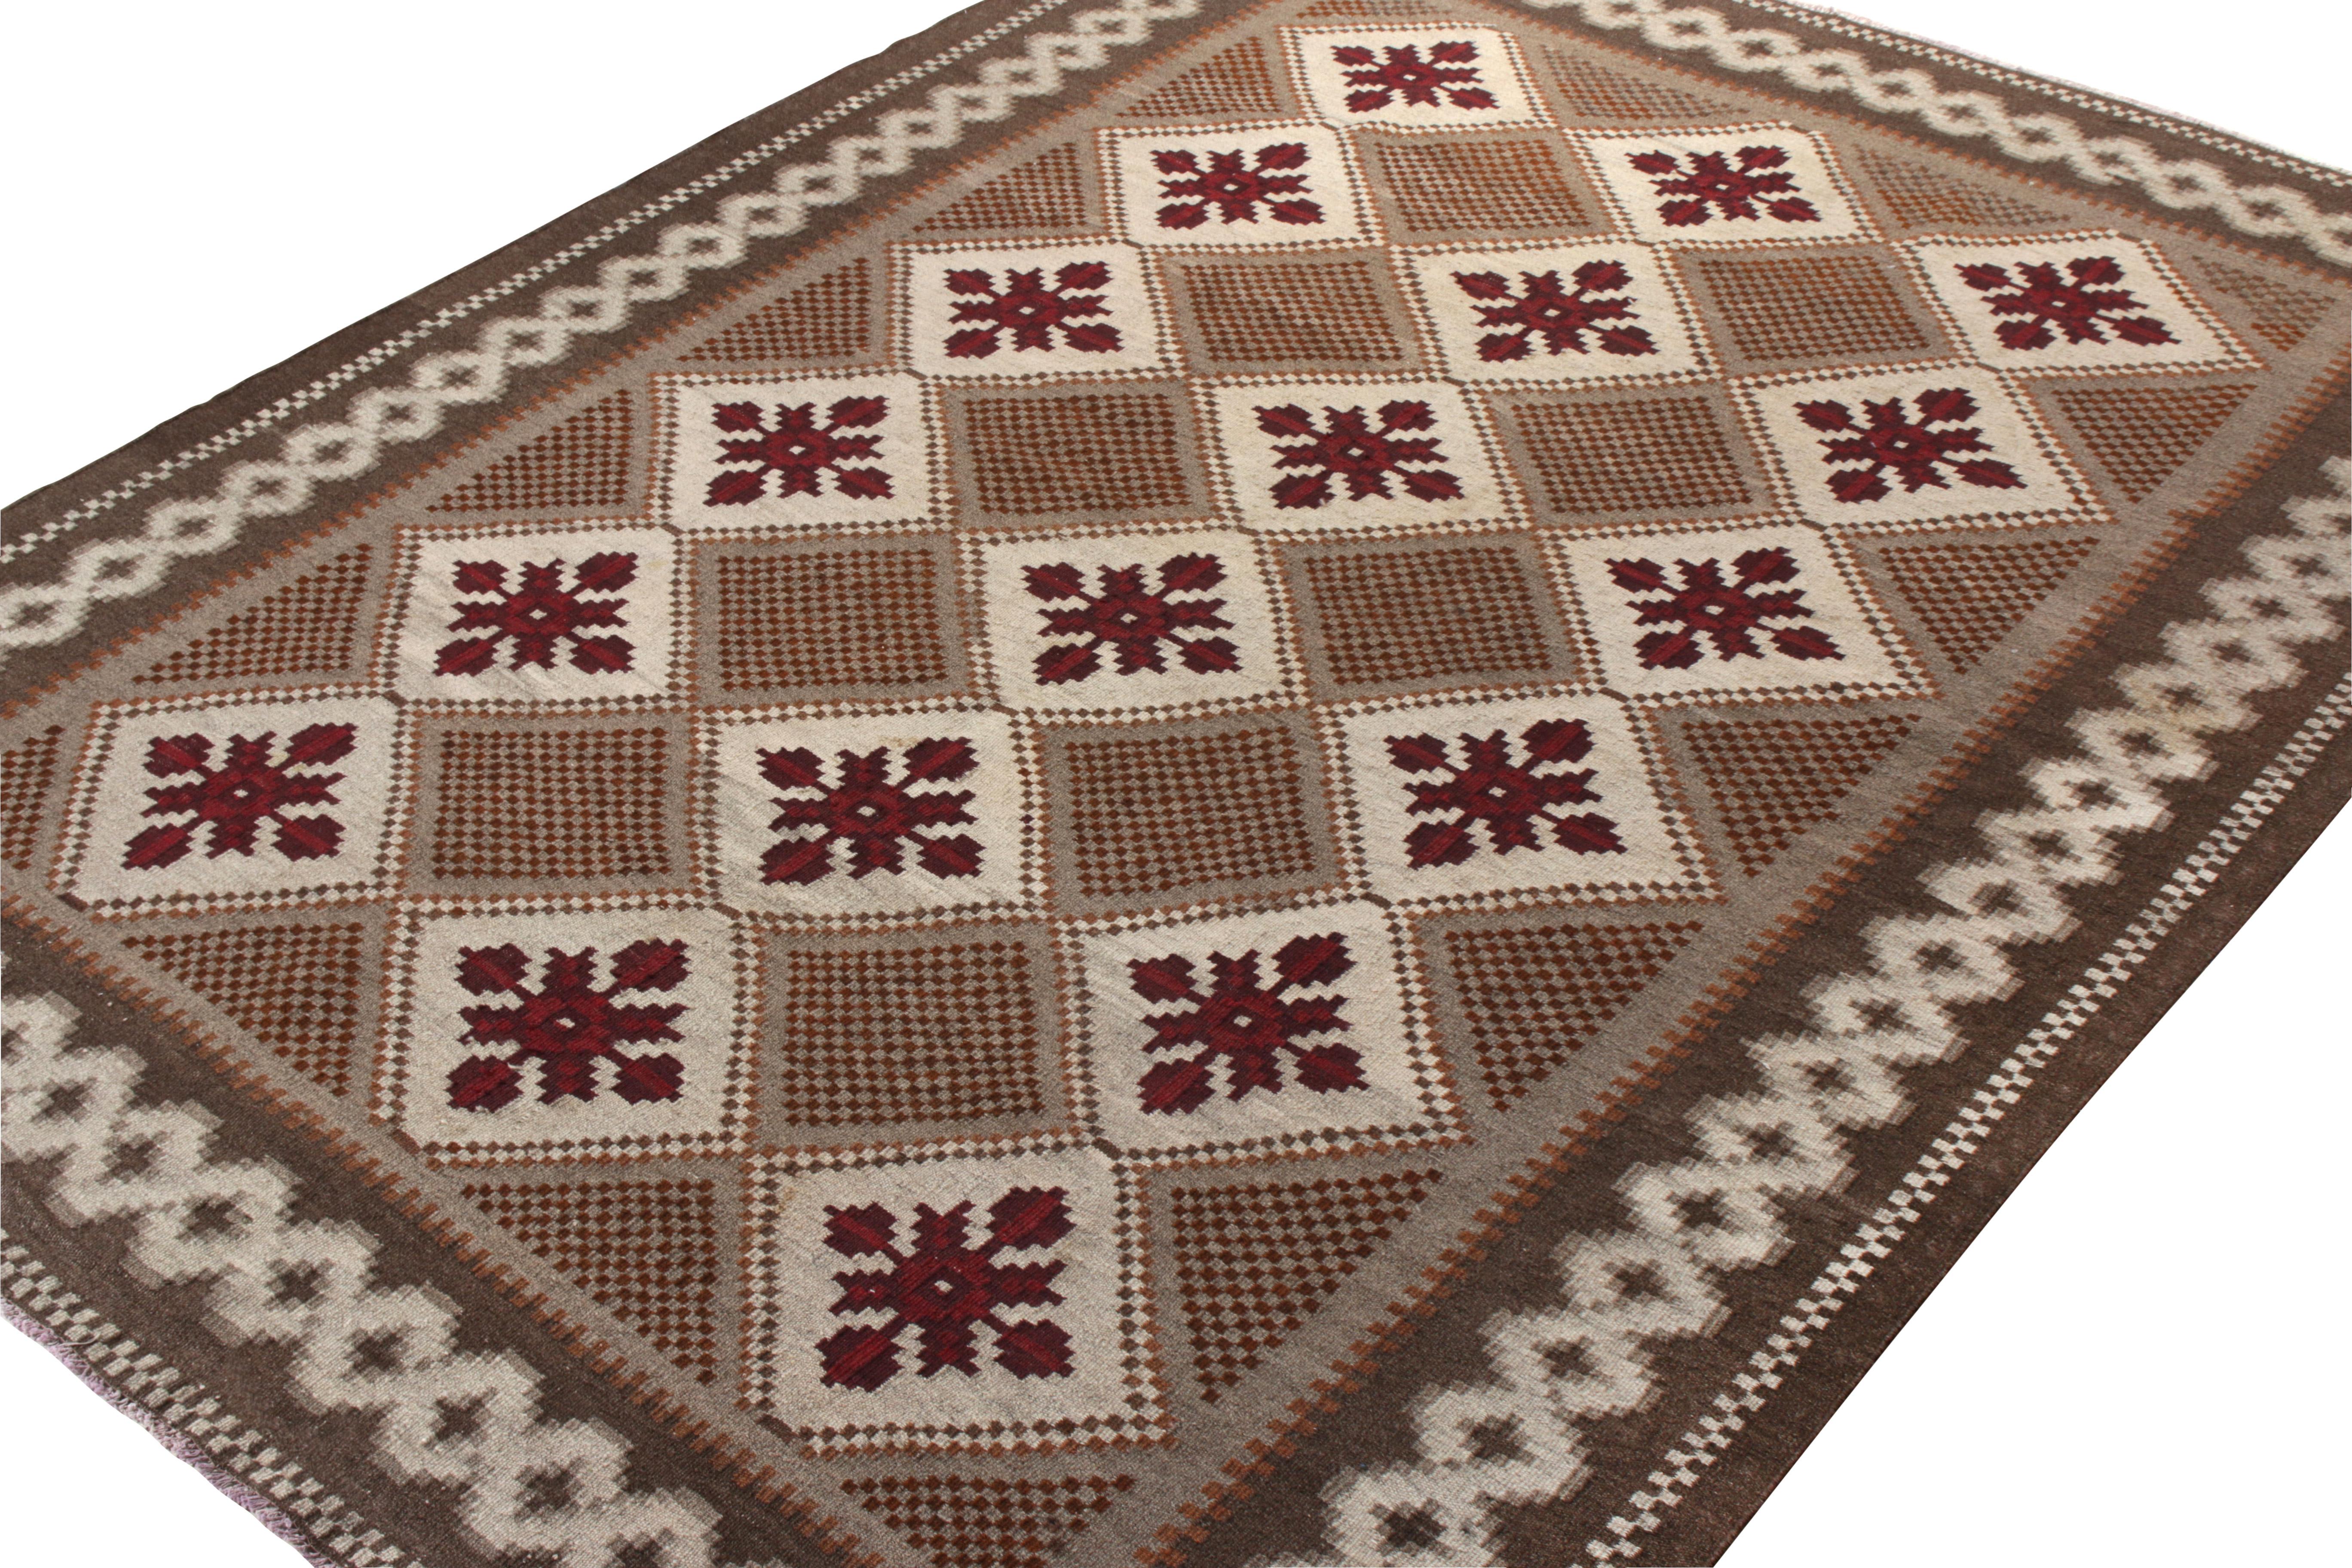 A vintage mid-century Moldavian Kilim originating from Turkey circa 1950-1960, joining Rug & Kilim’s coveted flatweave repertoire. Scaled at 7x9, this uncommon style dons a European garb endowed with floral and geometric patterns in brown,grey and